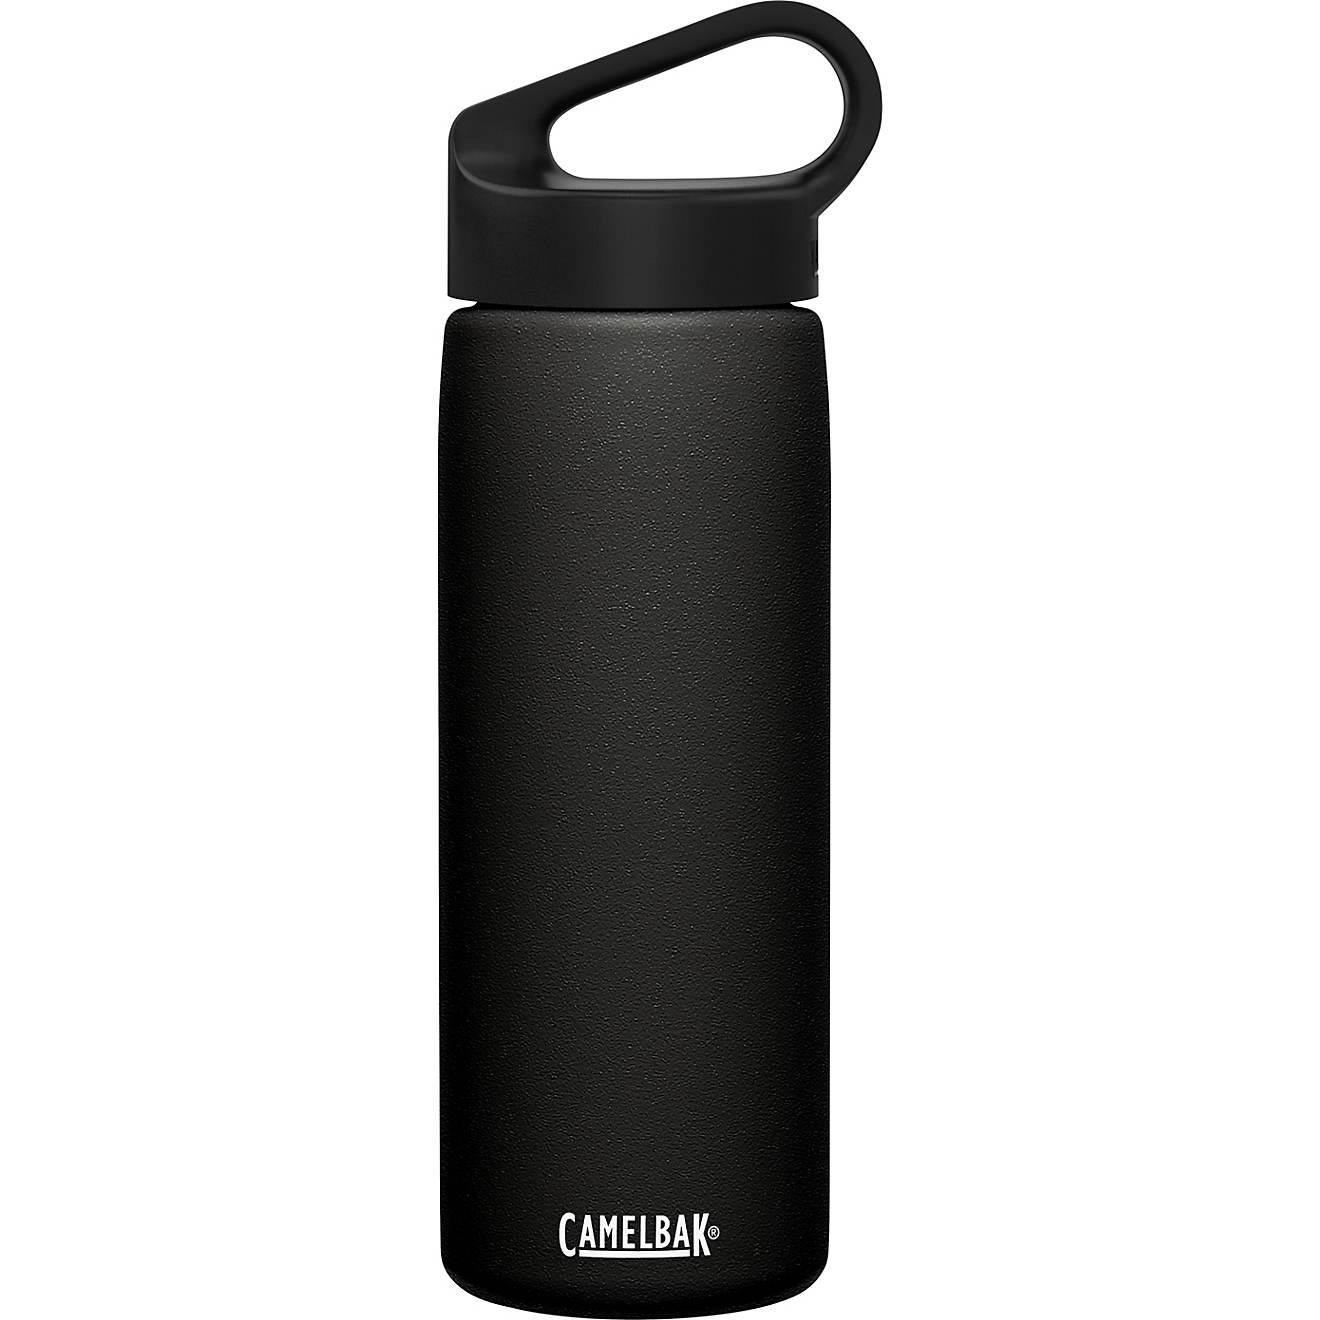 CamelBak Carry Cap 20 oz Insulated Stainless Steel Water Bottle                                                                  - view number 1